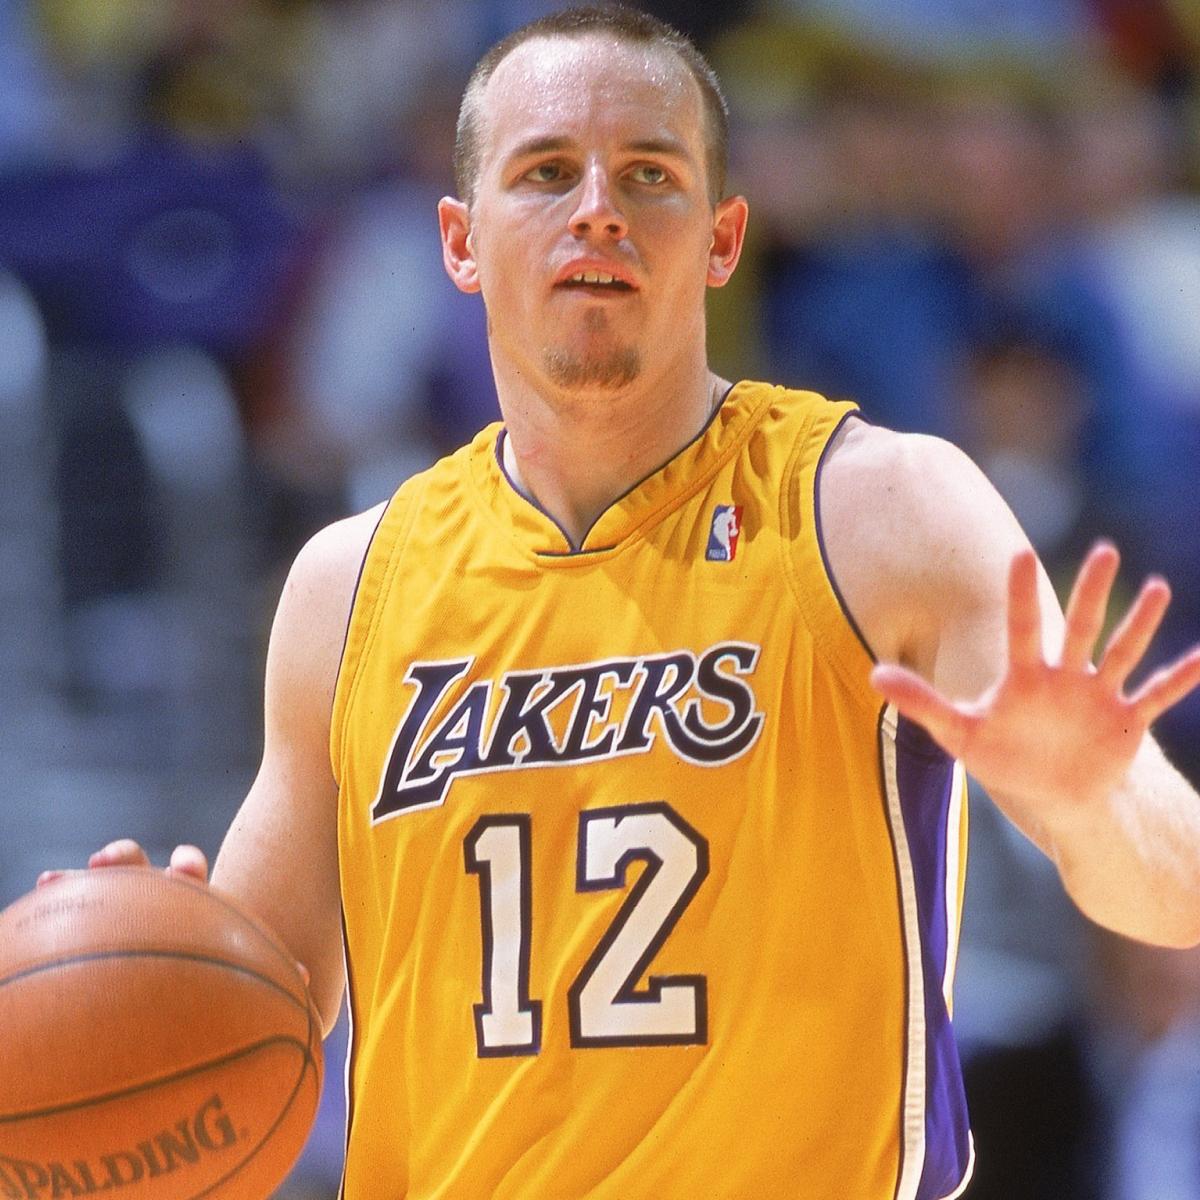 Lakers Rumors: Former LAL Guard Mike Penberthy Hired as Shooting Coach | Bleacher ...